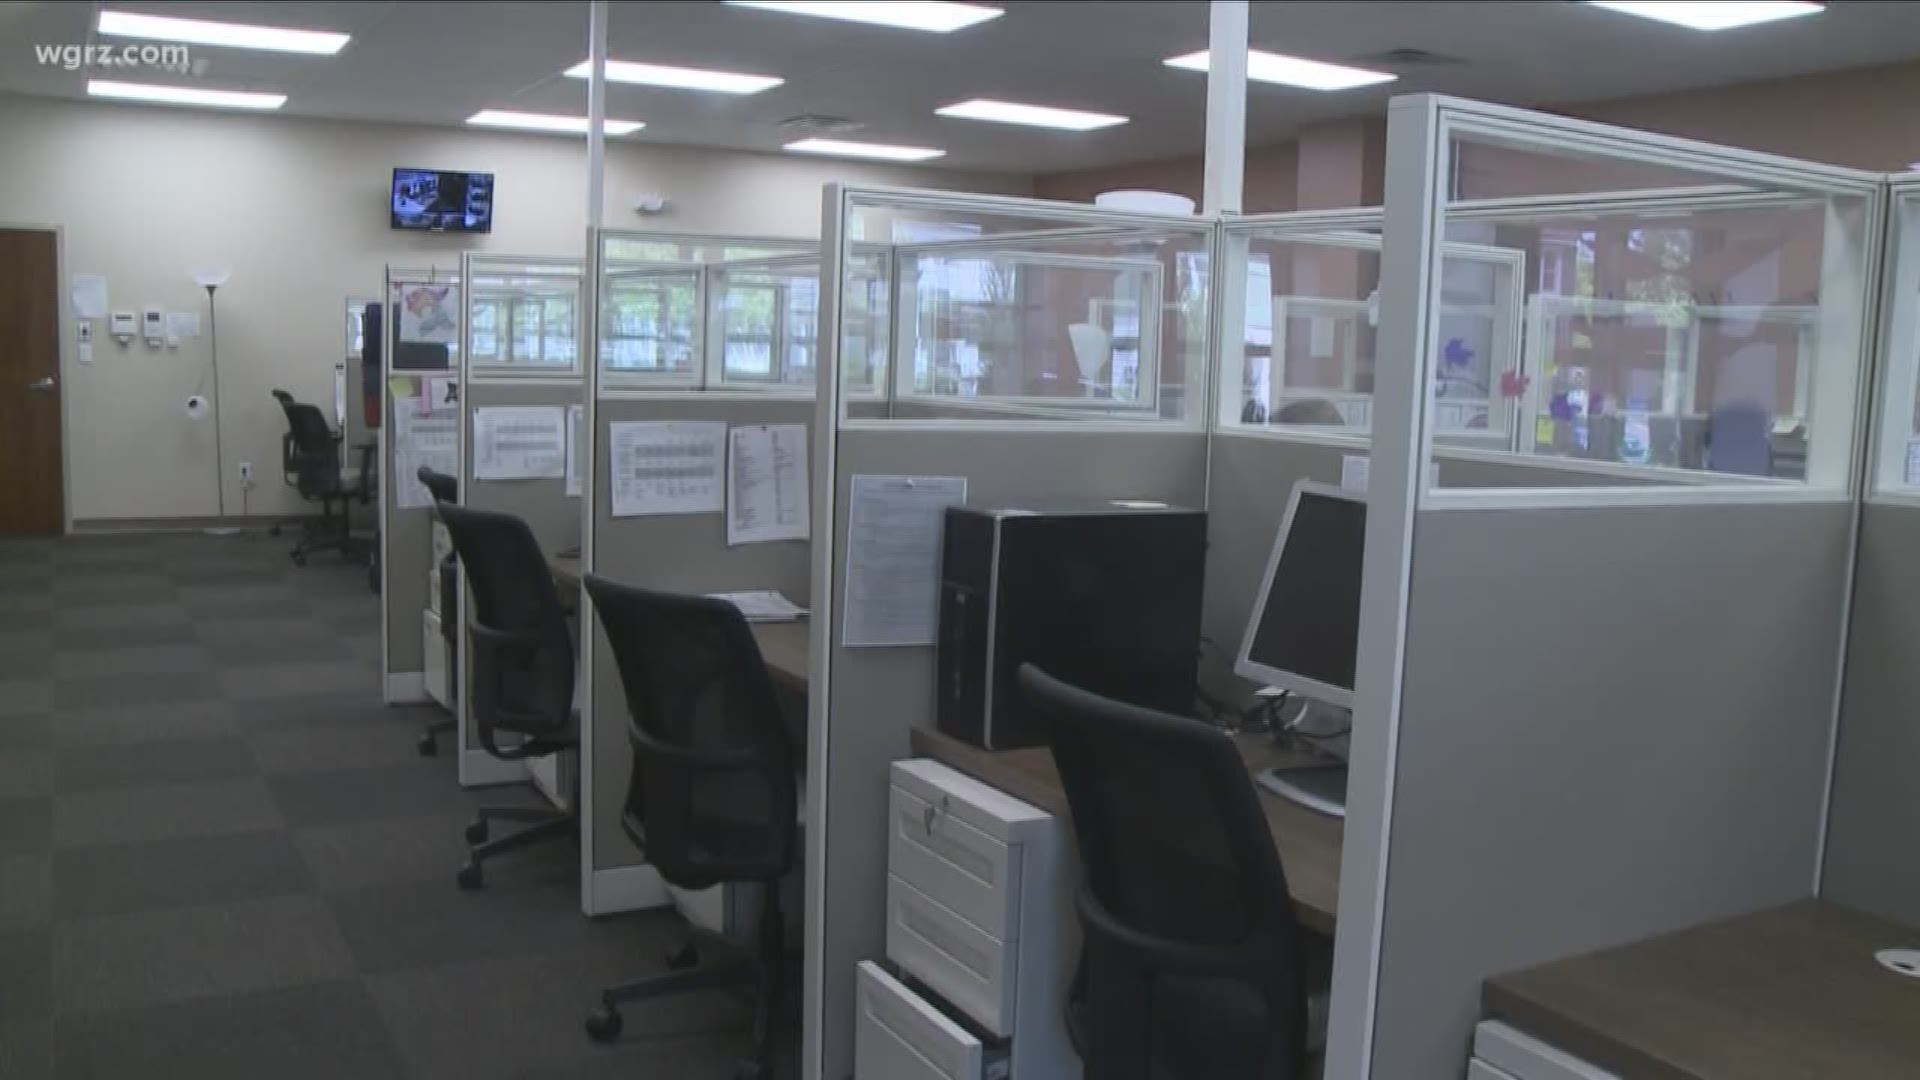 Crisis Services Moves Into A New Home